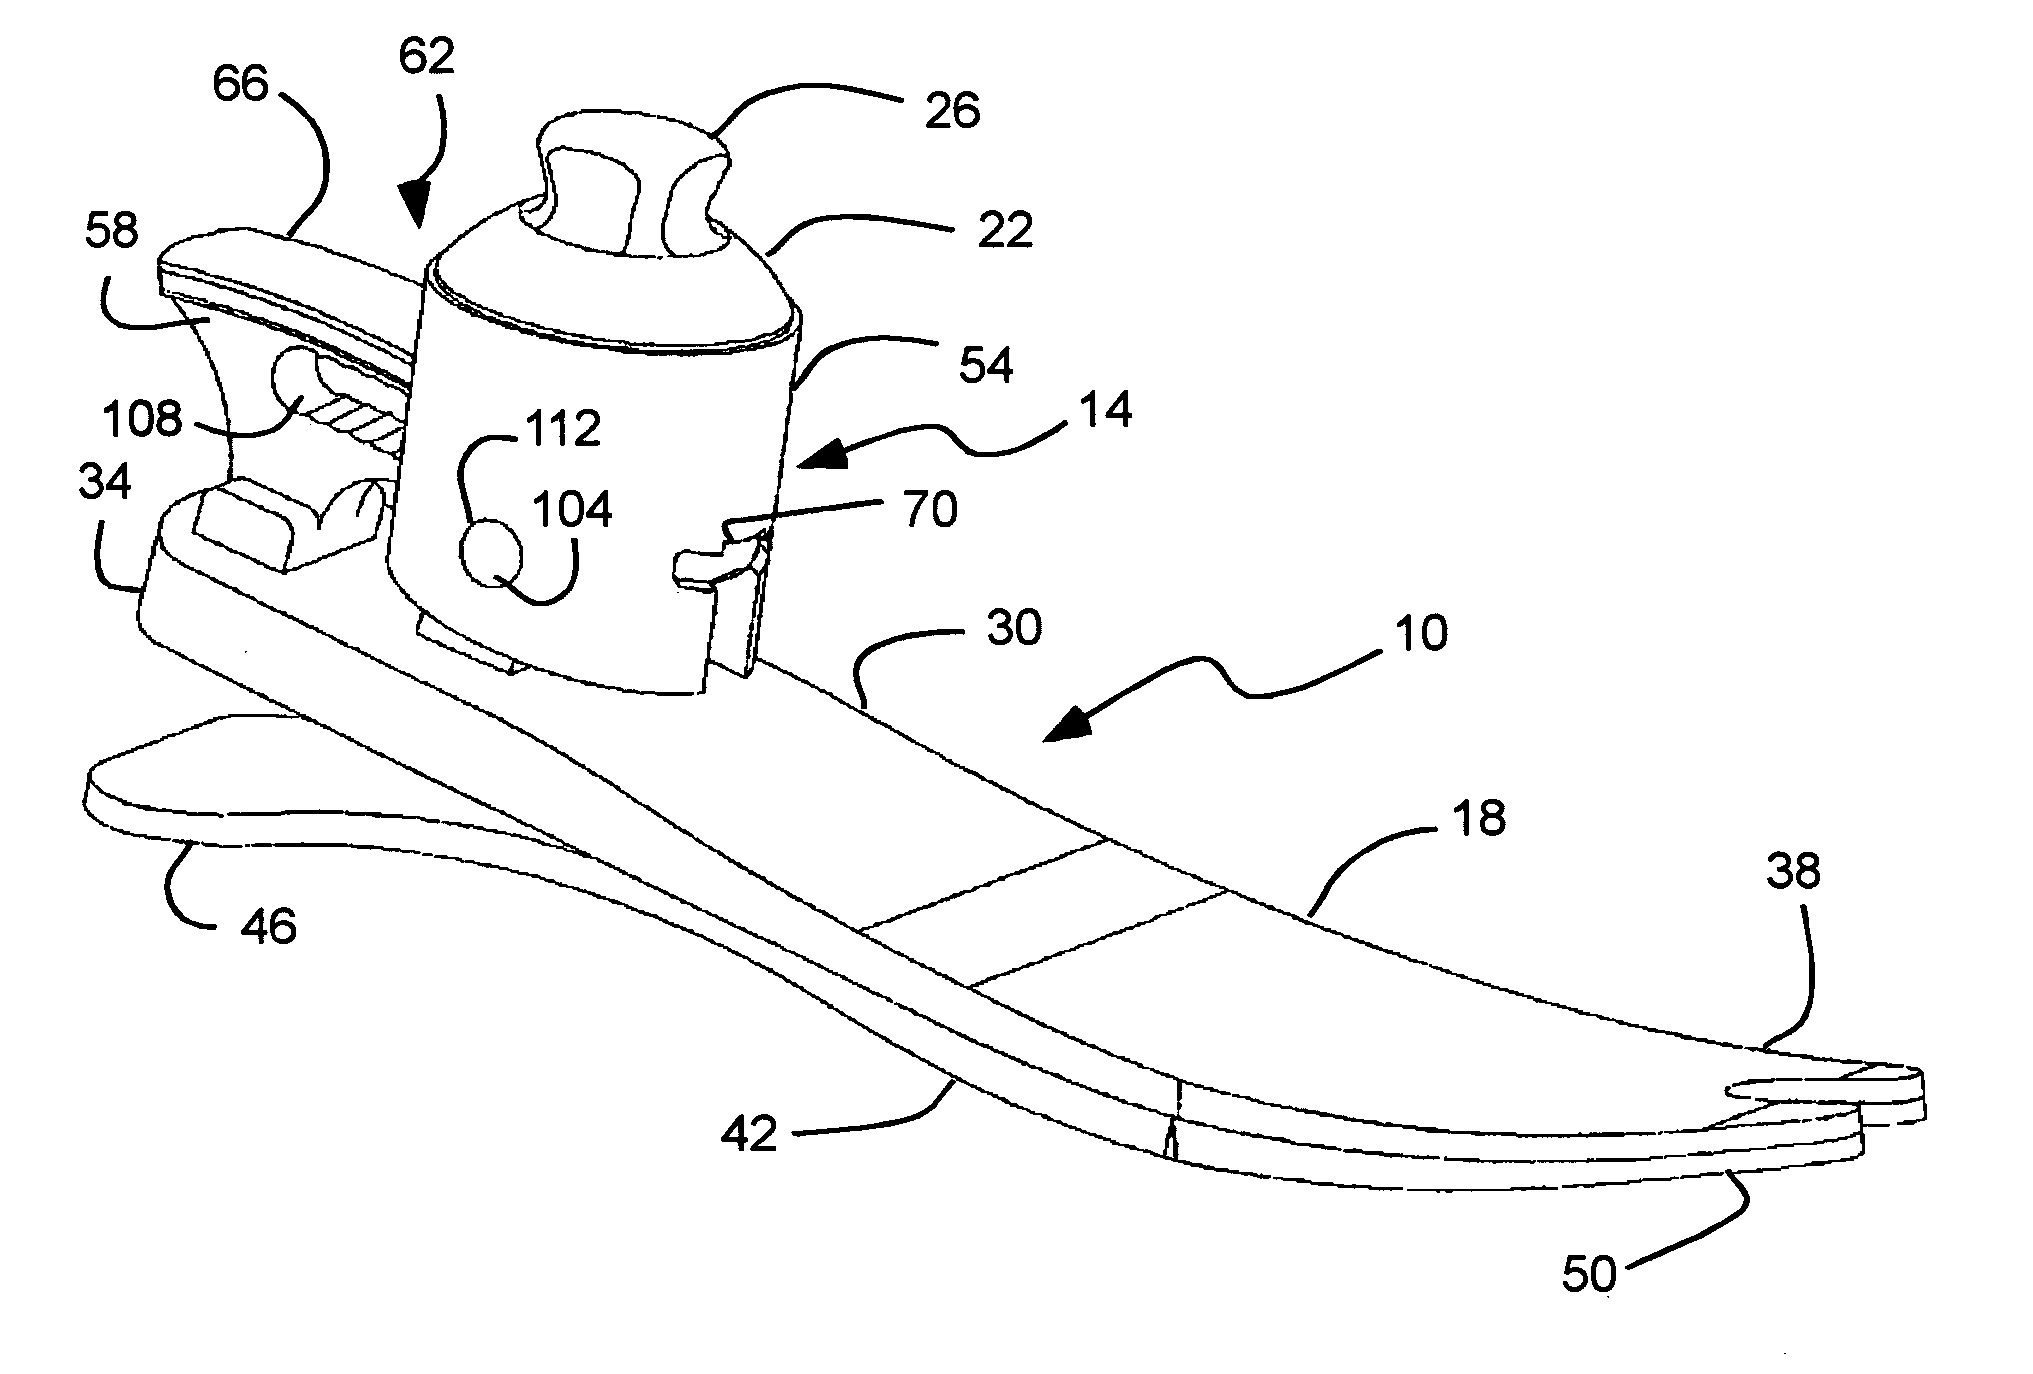 Prosthetic foot with an adjustable ankle and method